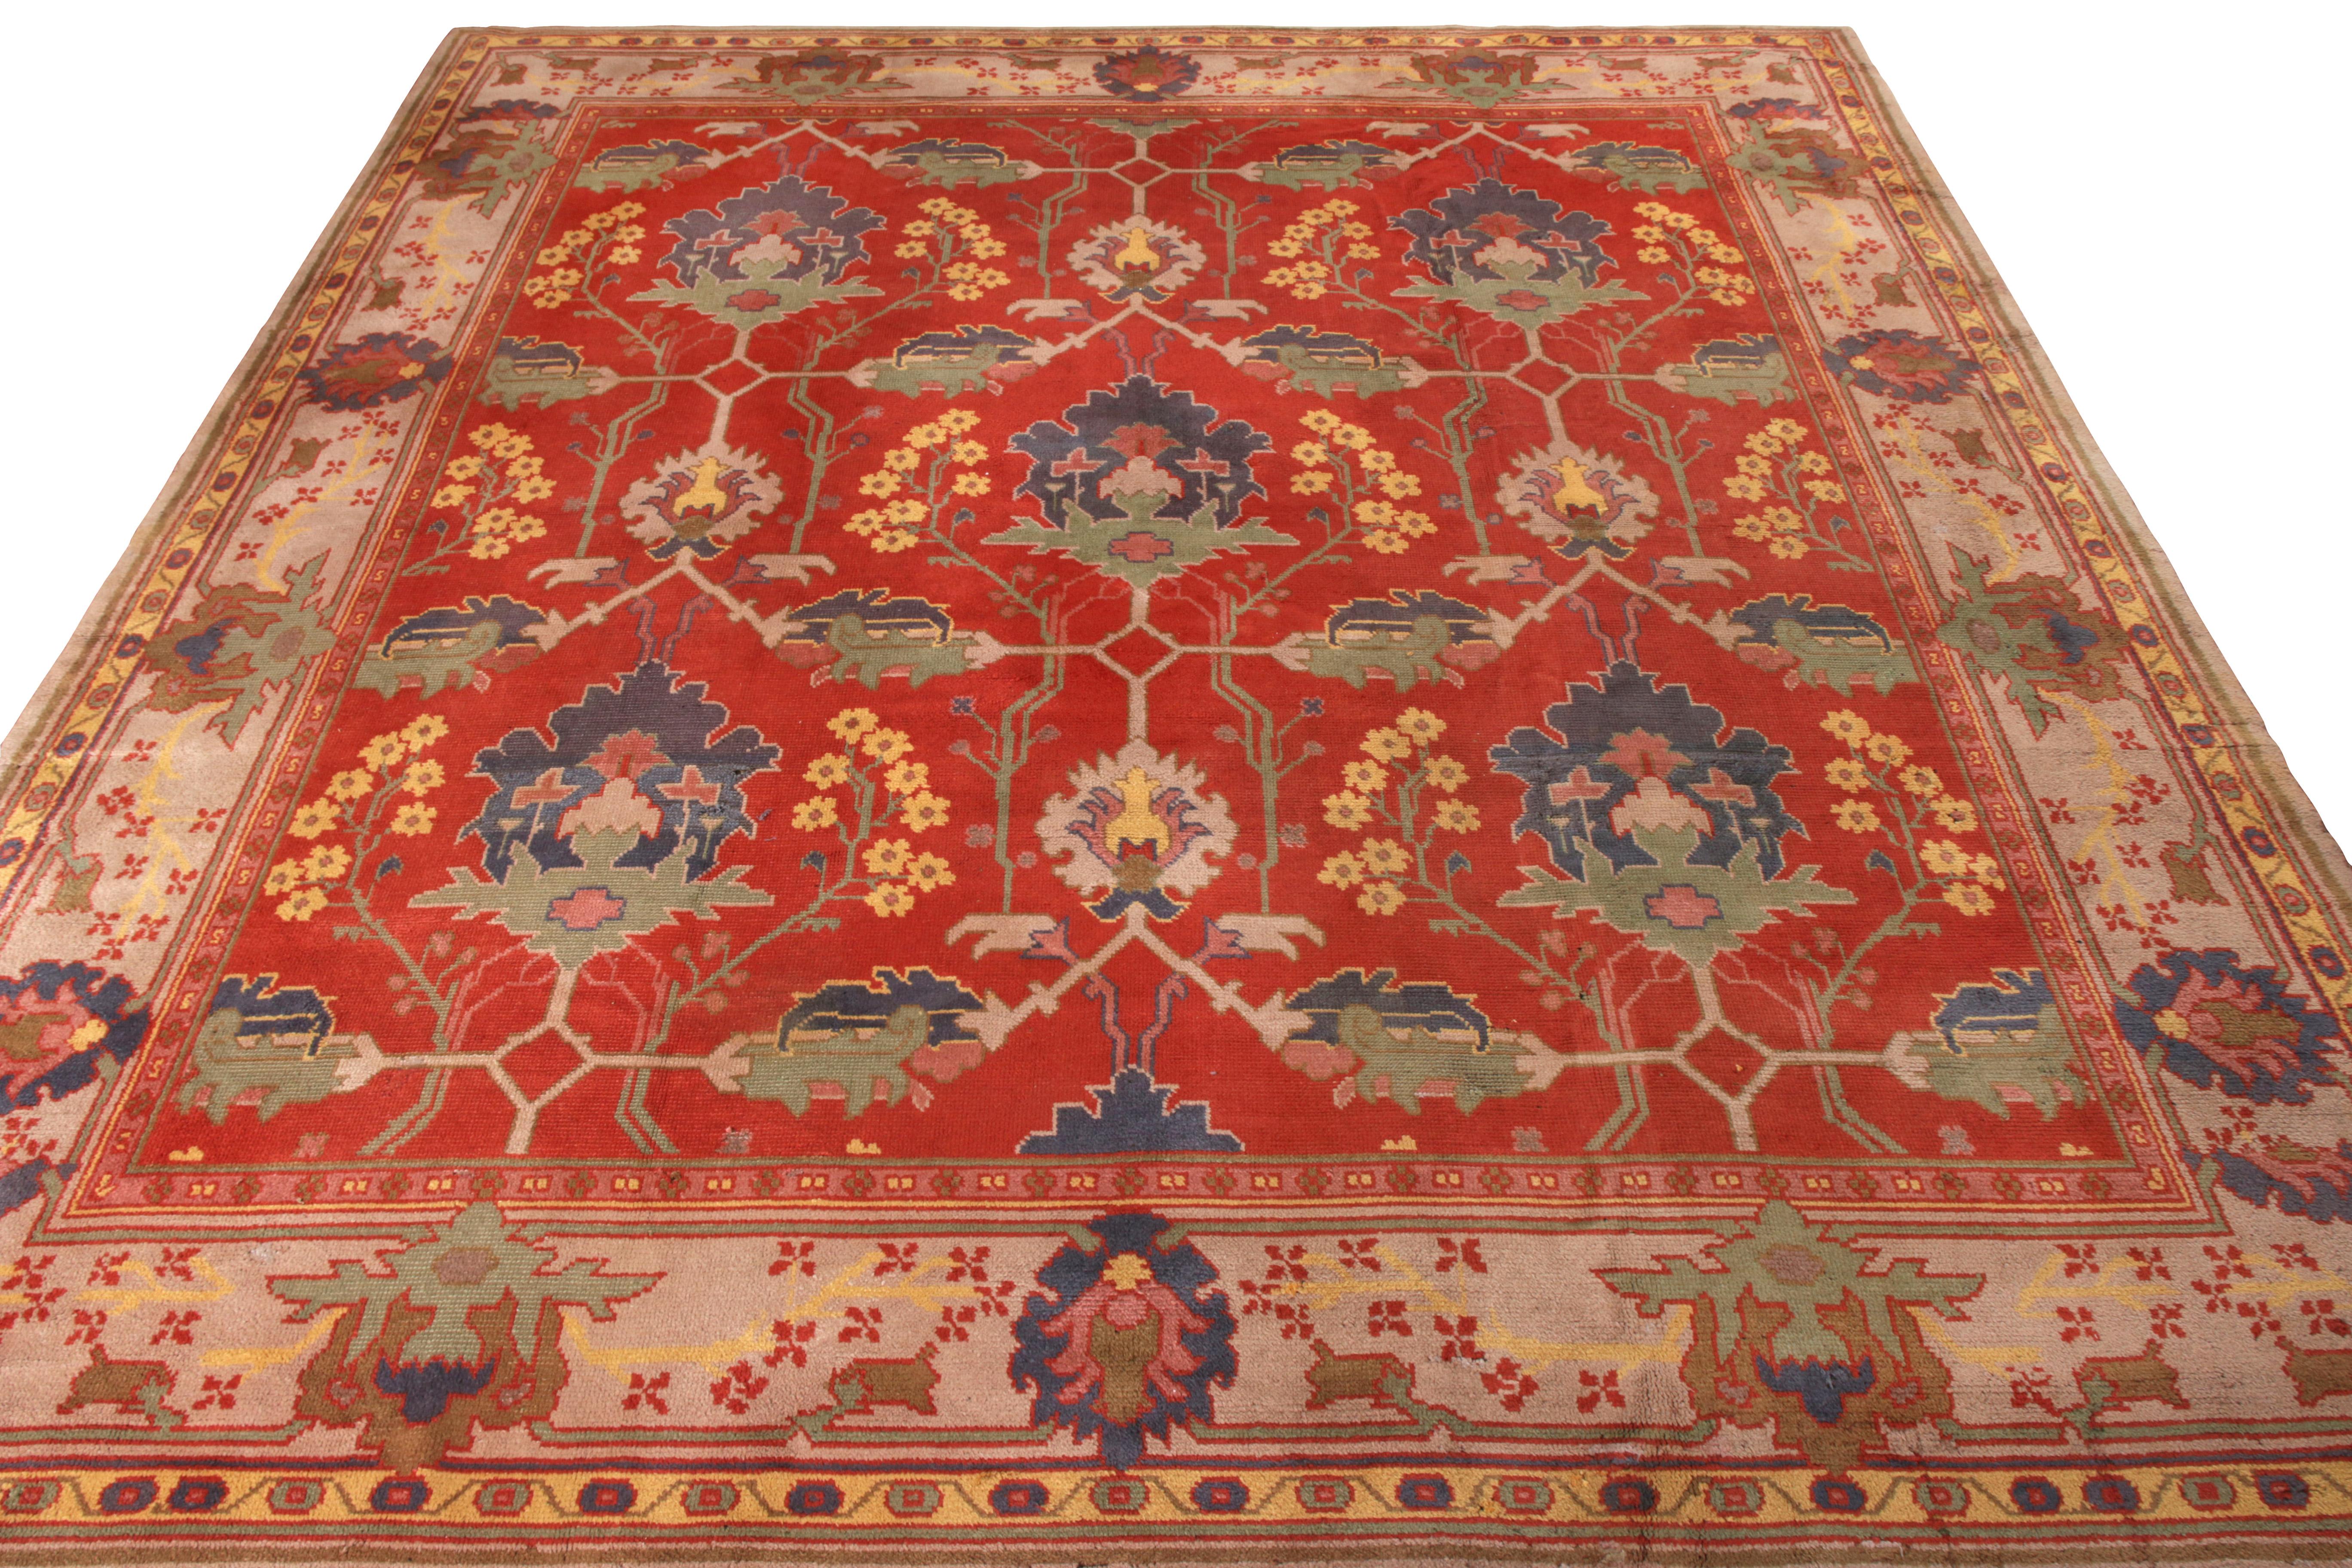 Originating from Ireland circa 1910–1920, this antique 13x14 Arts & Crafts rug is a rare work from the English works of Charles Voysey. 

On the Design: 

Hand-knotted in wool, this piece enjoys a warm, saturated red field and beige border, with